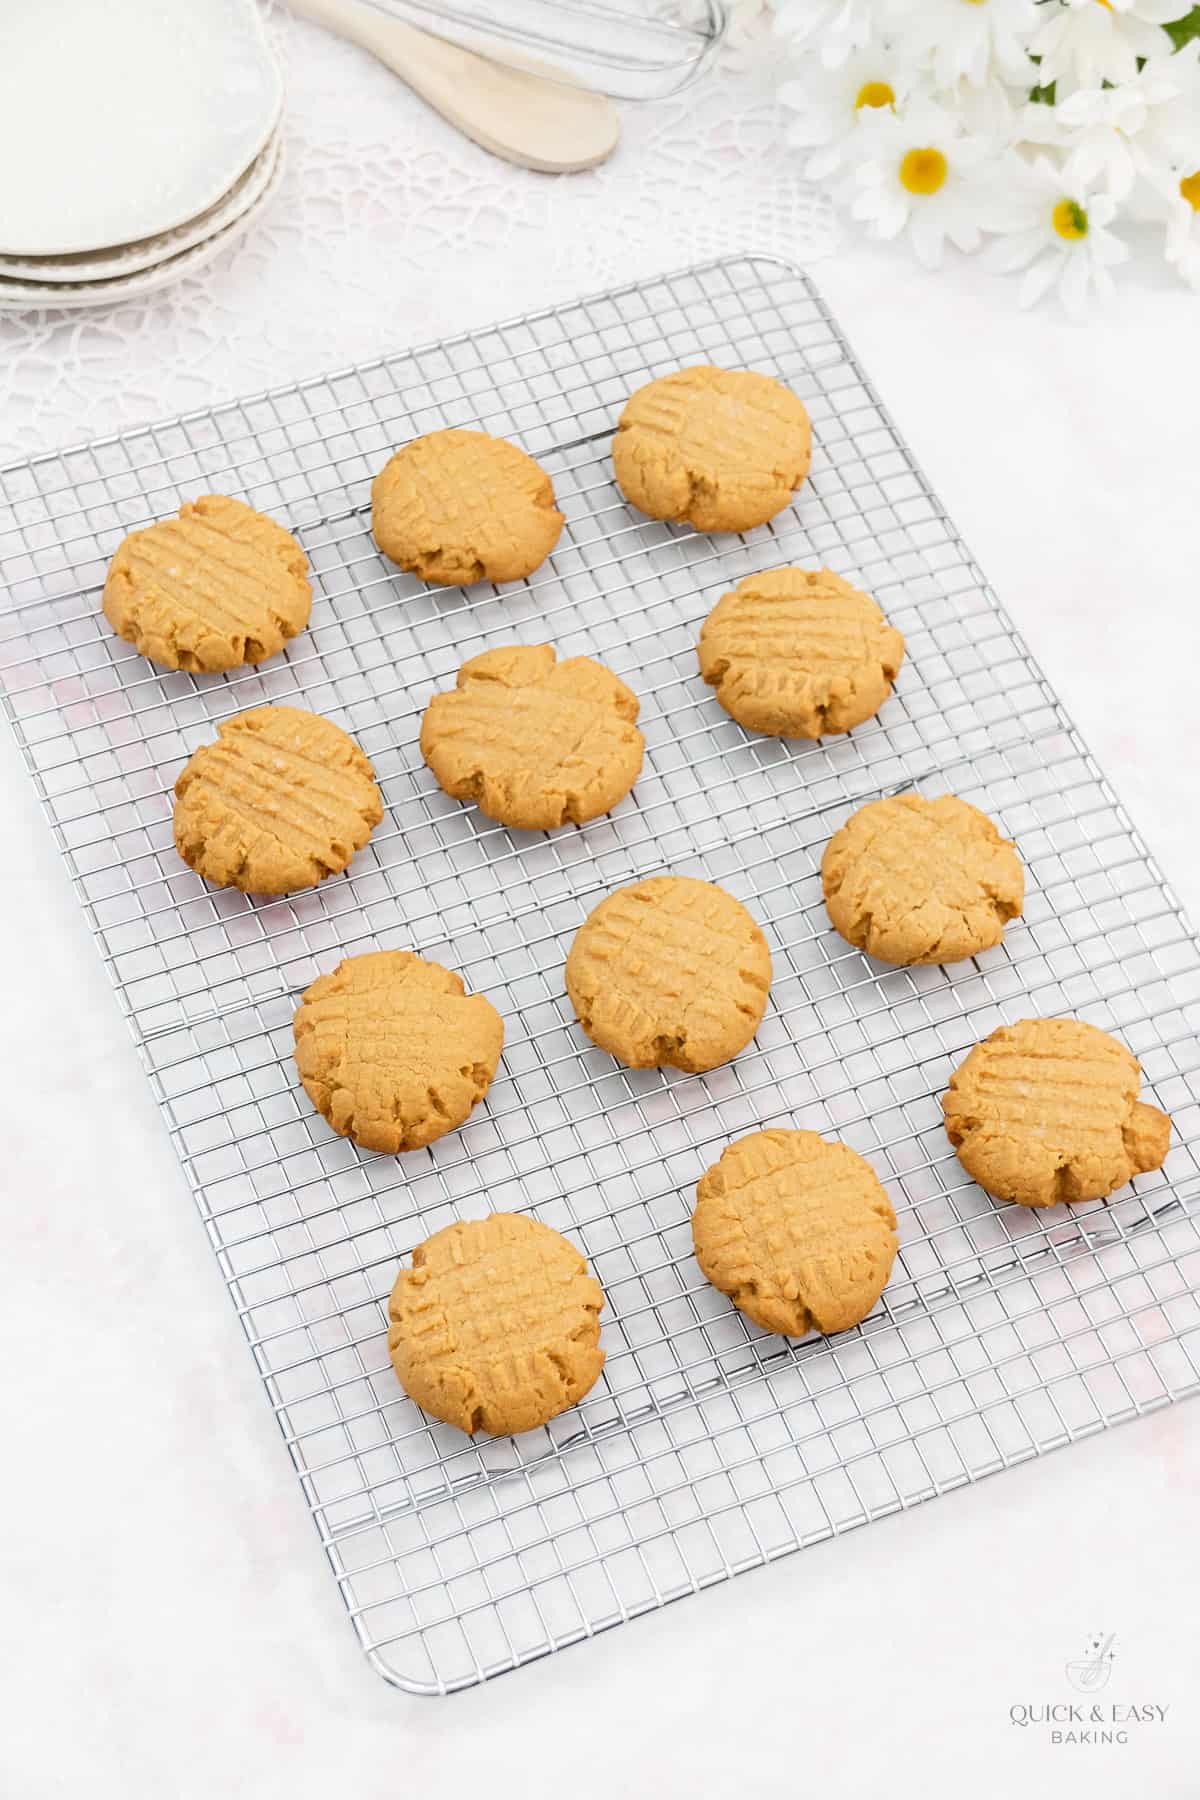 Baked soft peanut butter cookies on a cooling rack.